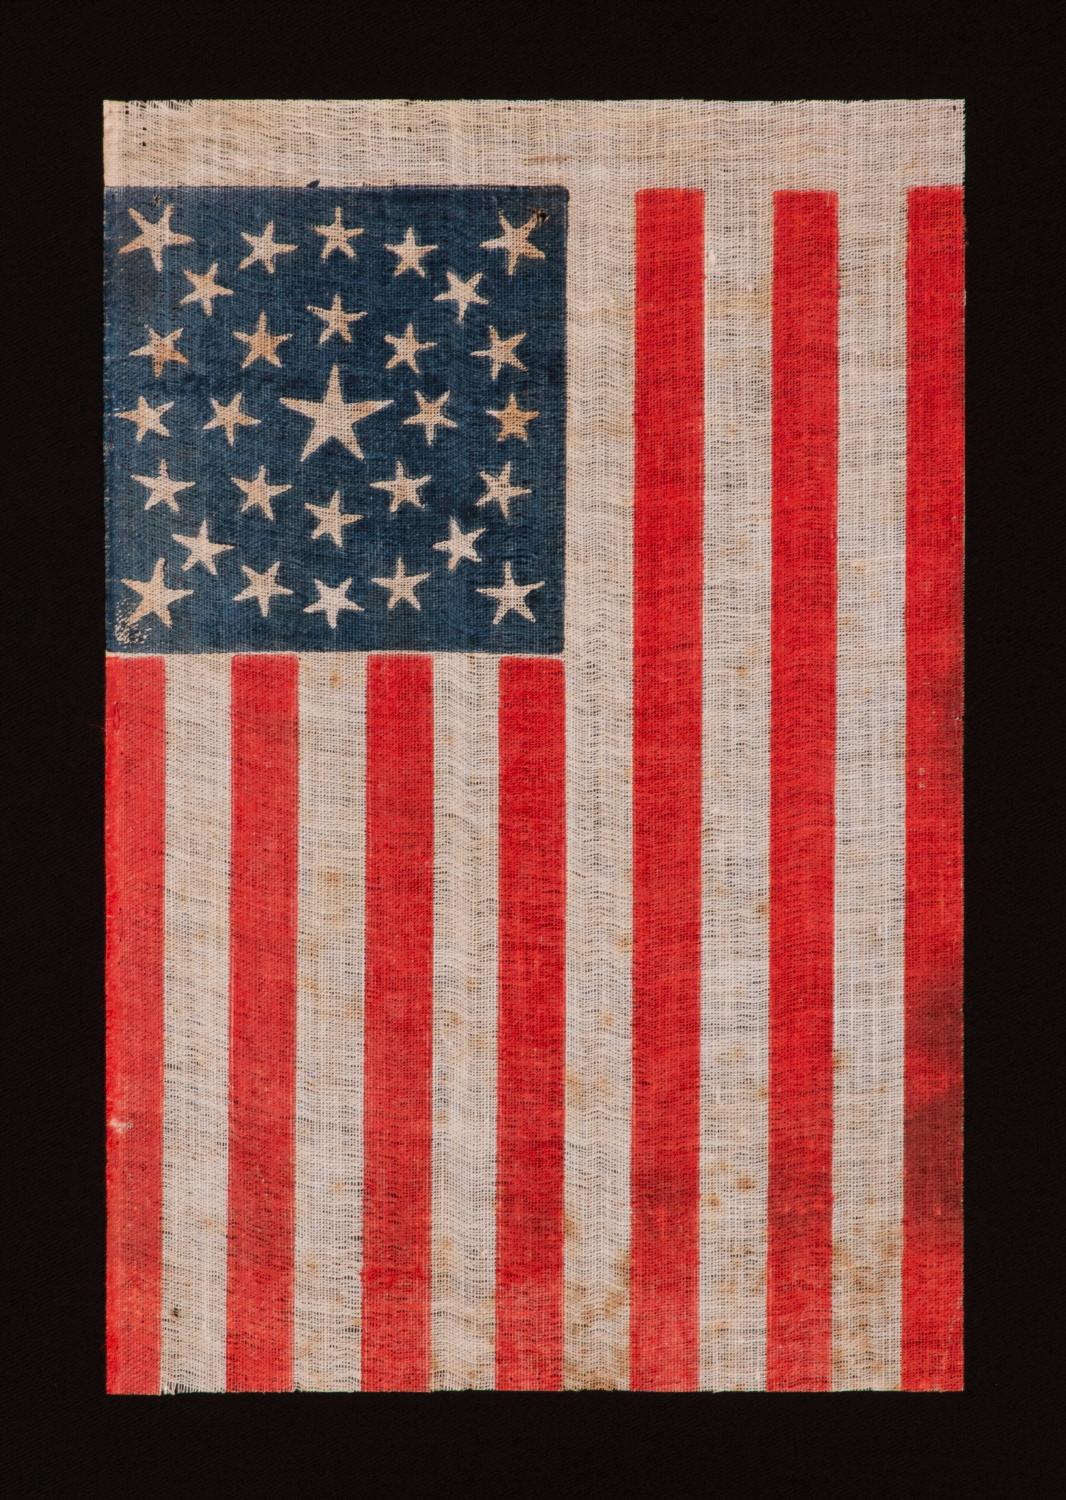 Antique American 29 Star Parade Flag with Stars in a Medallion Configuration (amerikanisch)